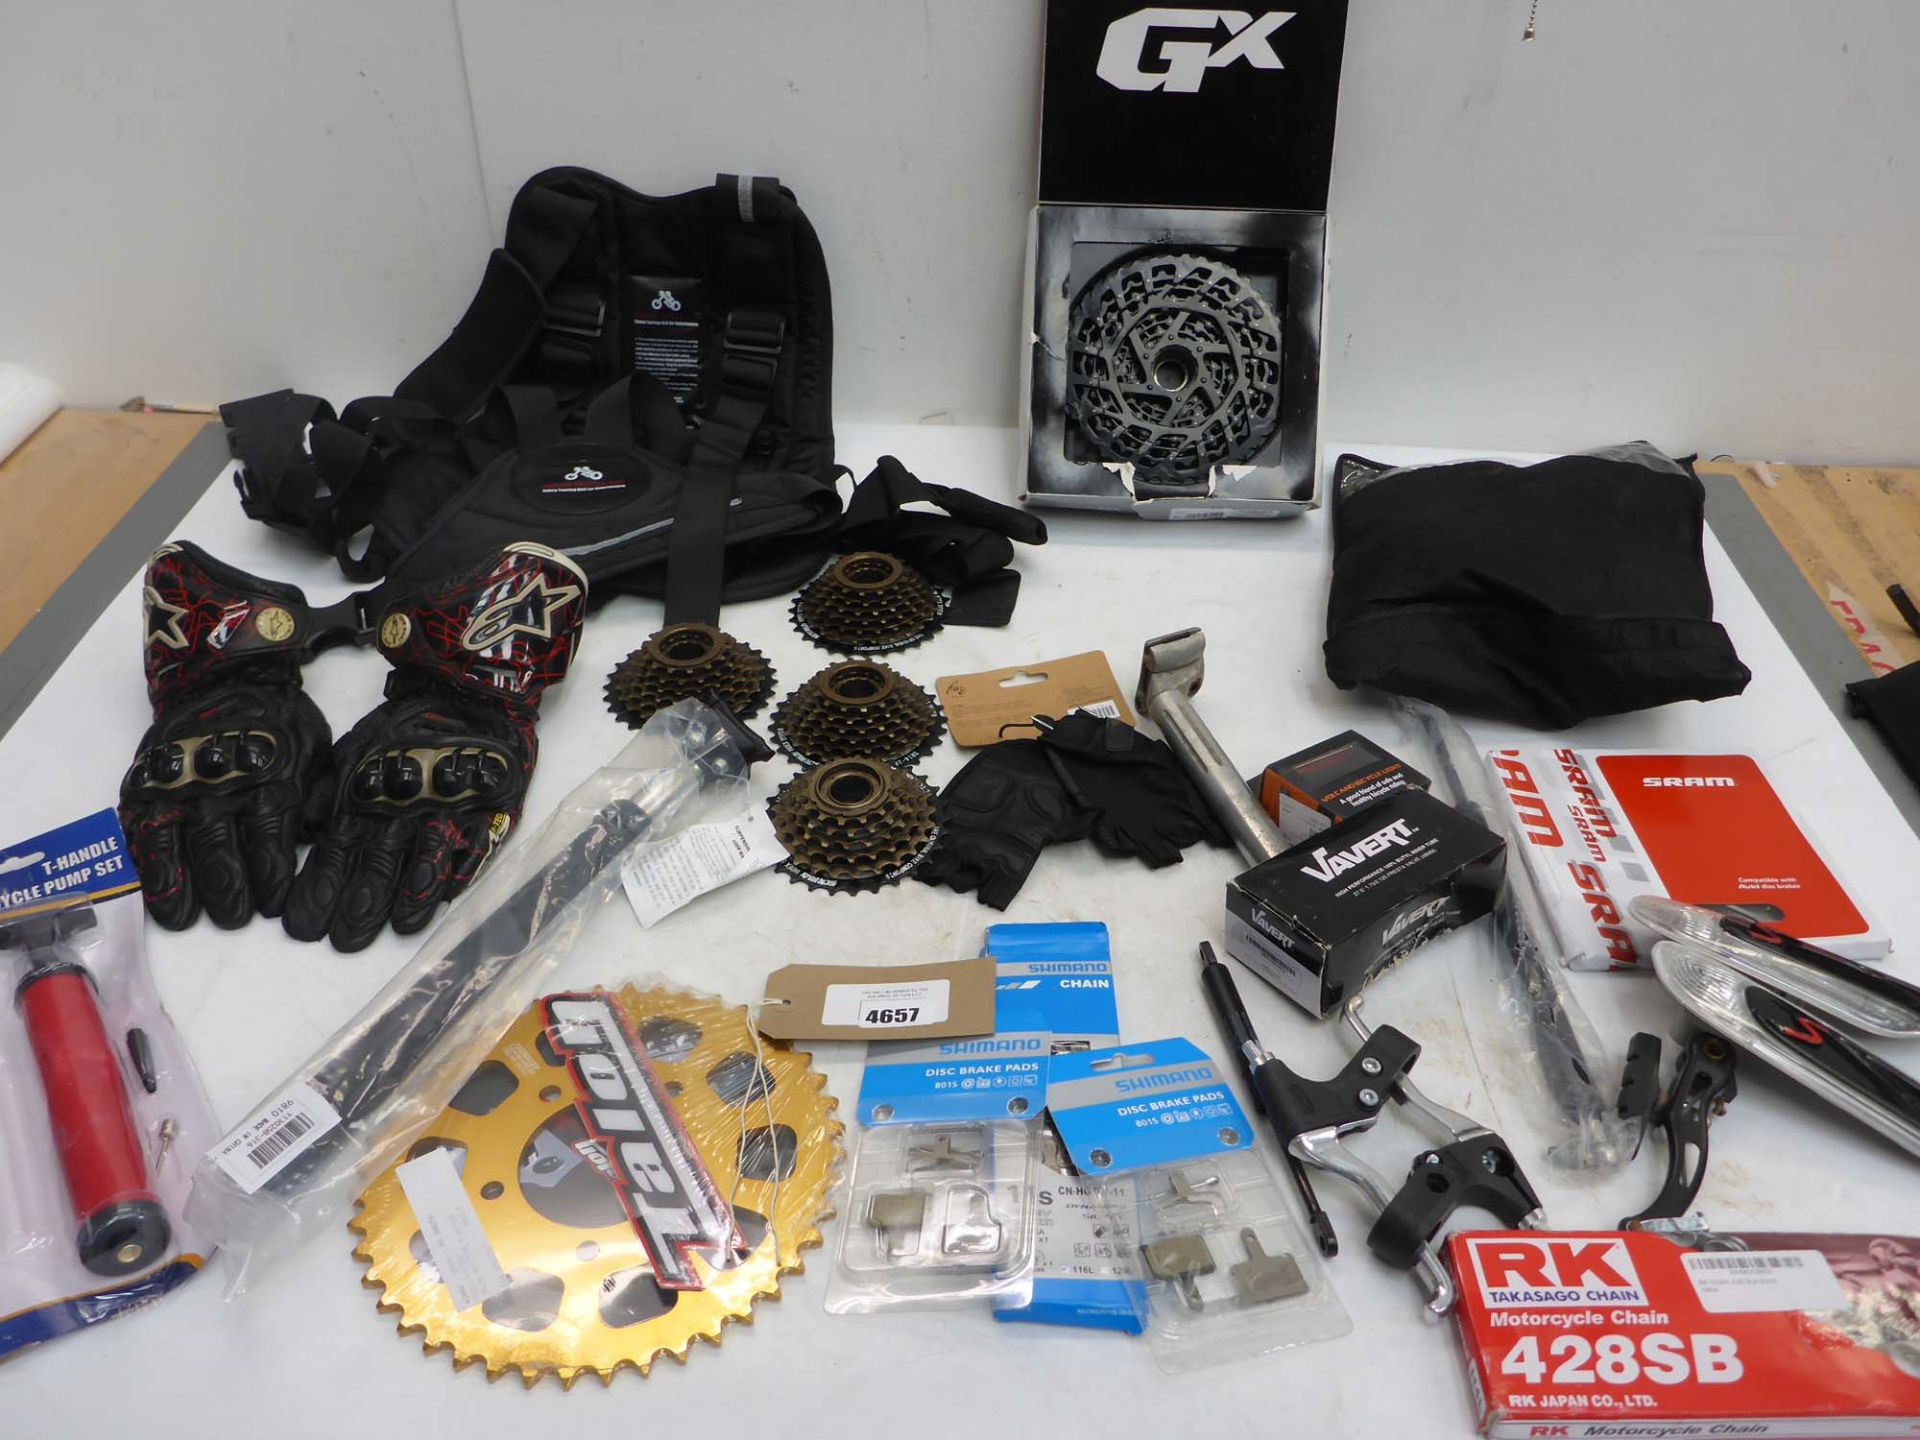 Motorbike & cycle parts including motorcycle chain, sprockets, Shimano chain & brake pads, touring